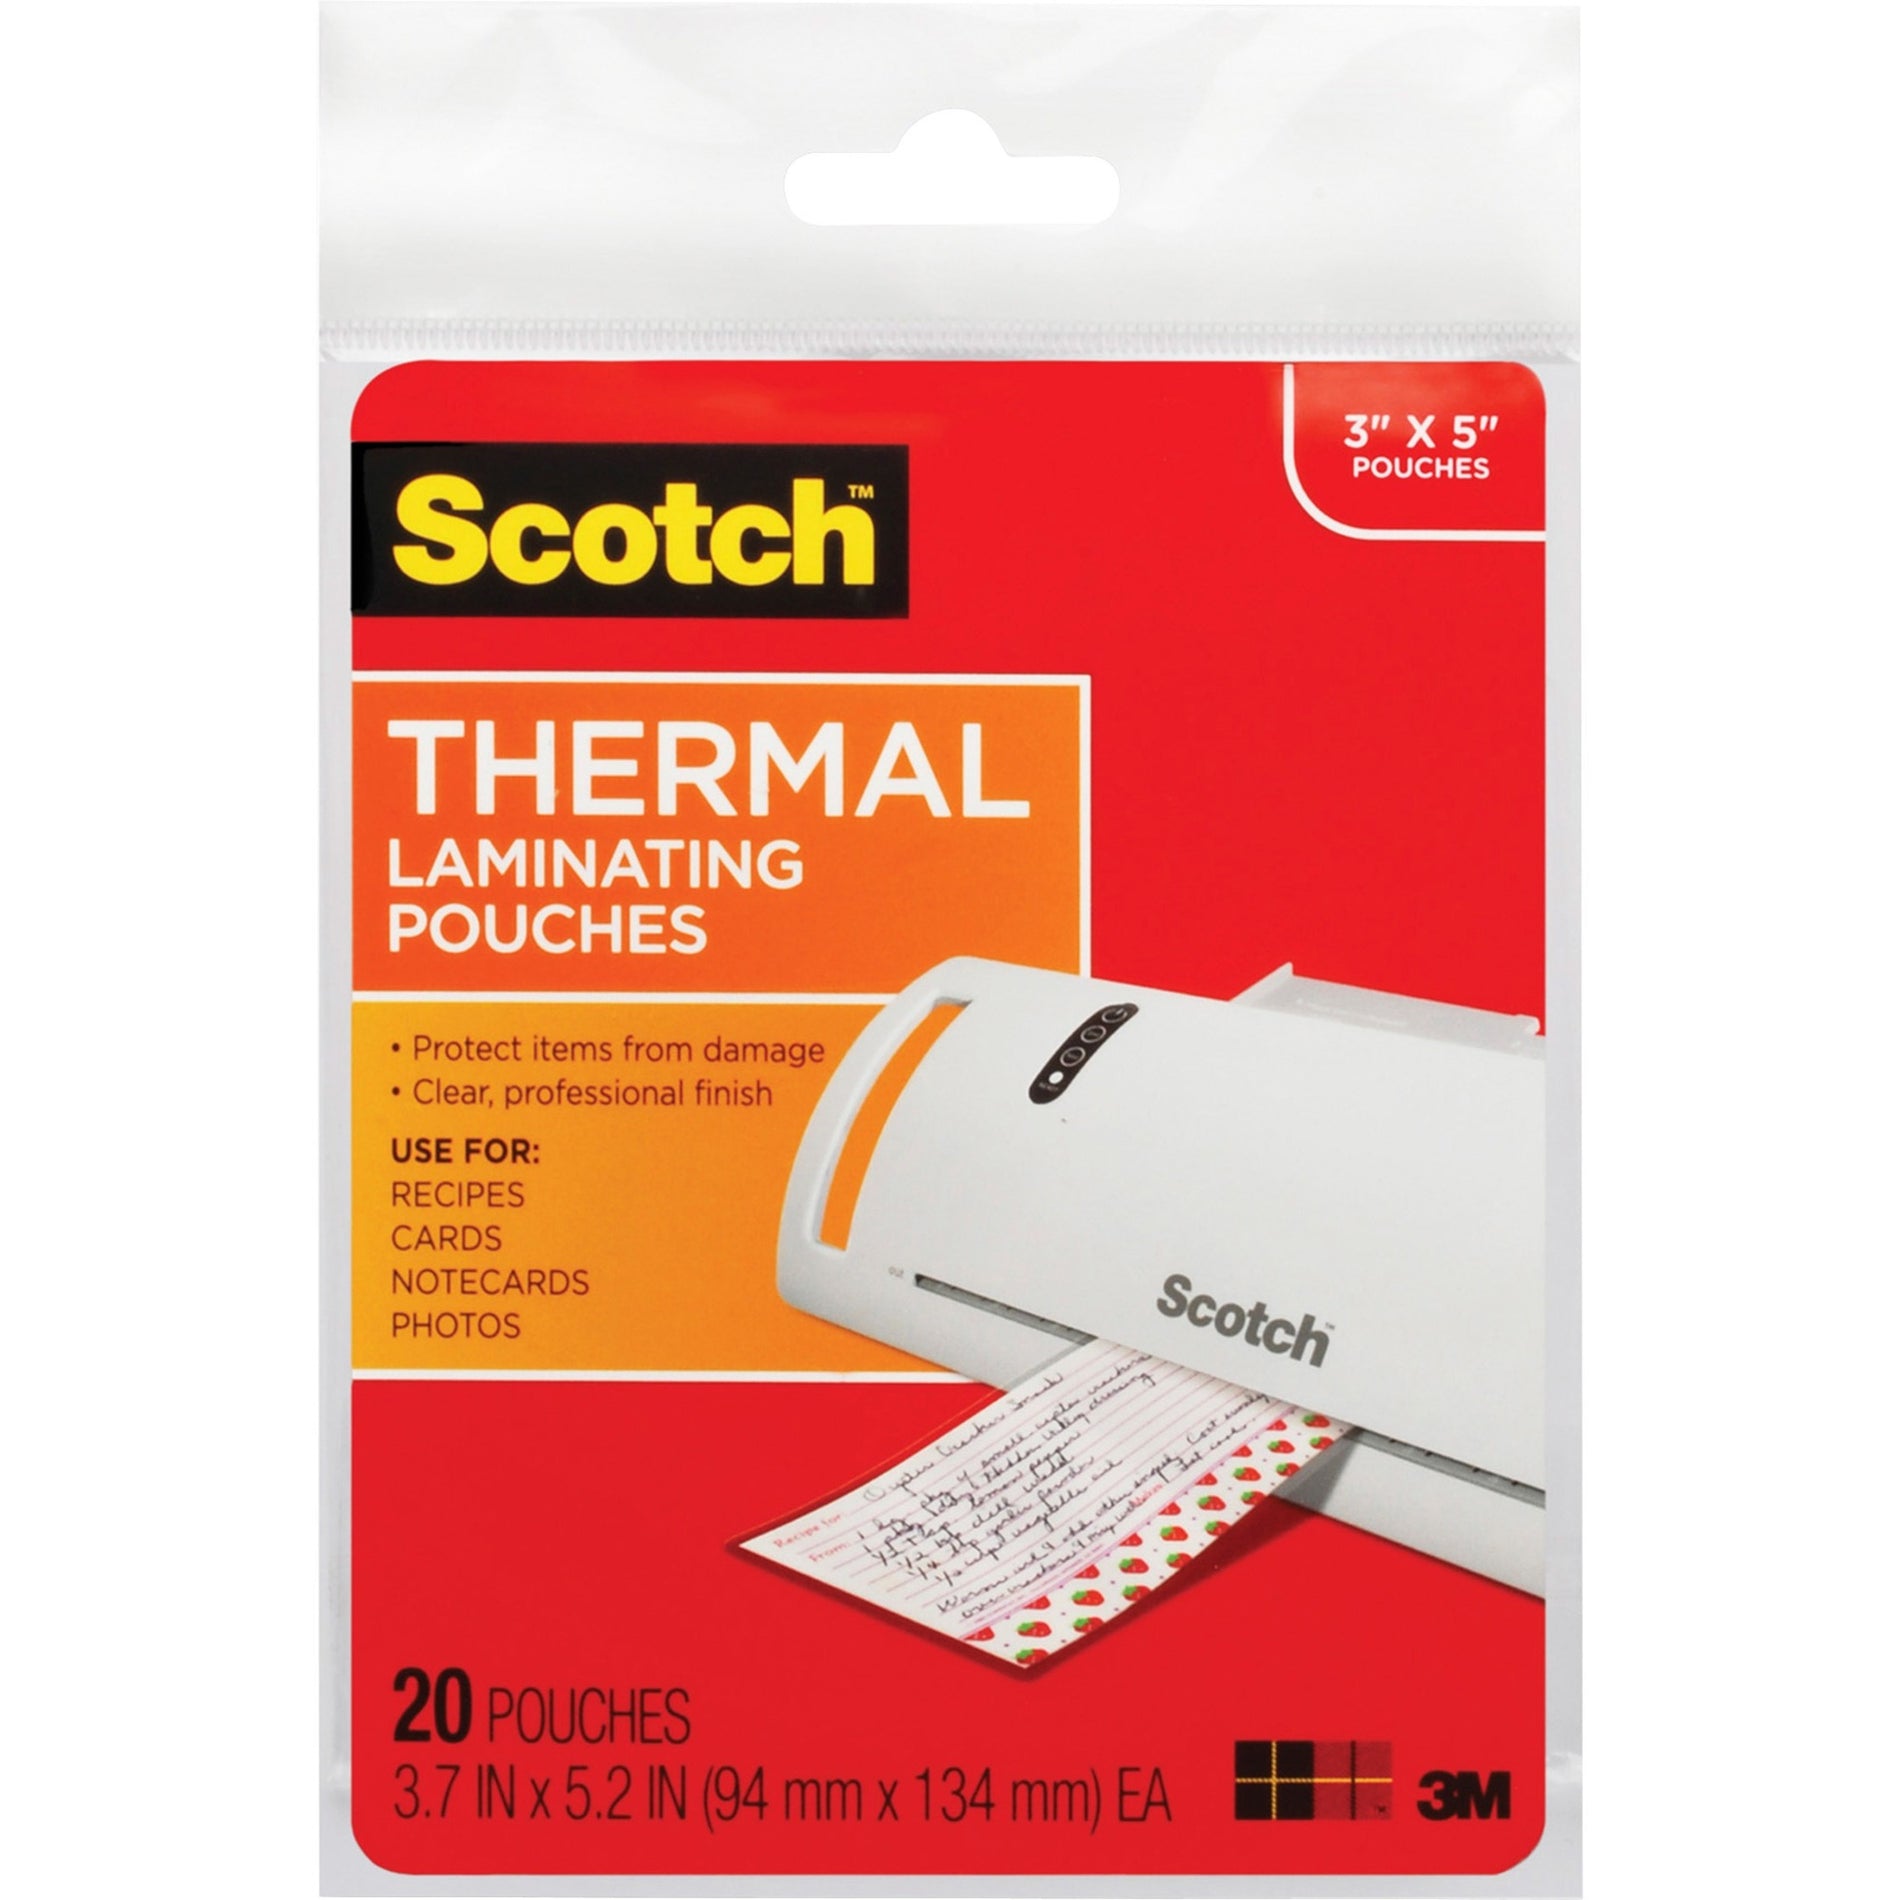 Scotch TP590220 Thermal Laminating Pouches, Double Sided, Glossy, 5 mil, 3.70" x 5.20" (20/Pack)